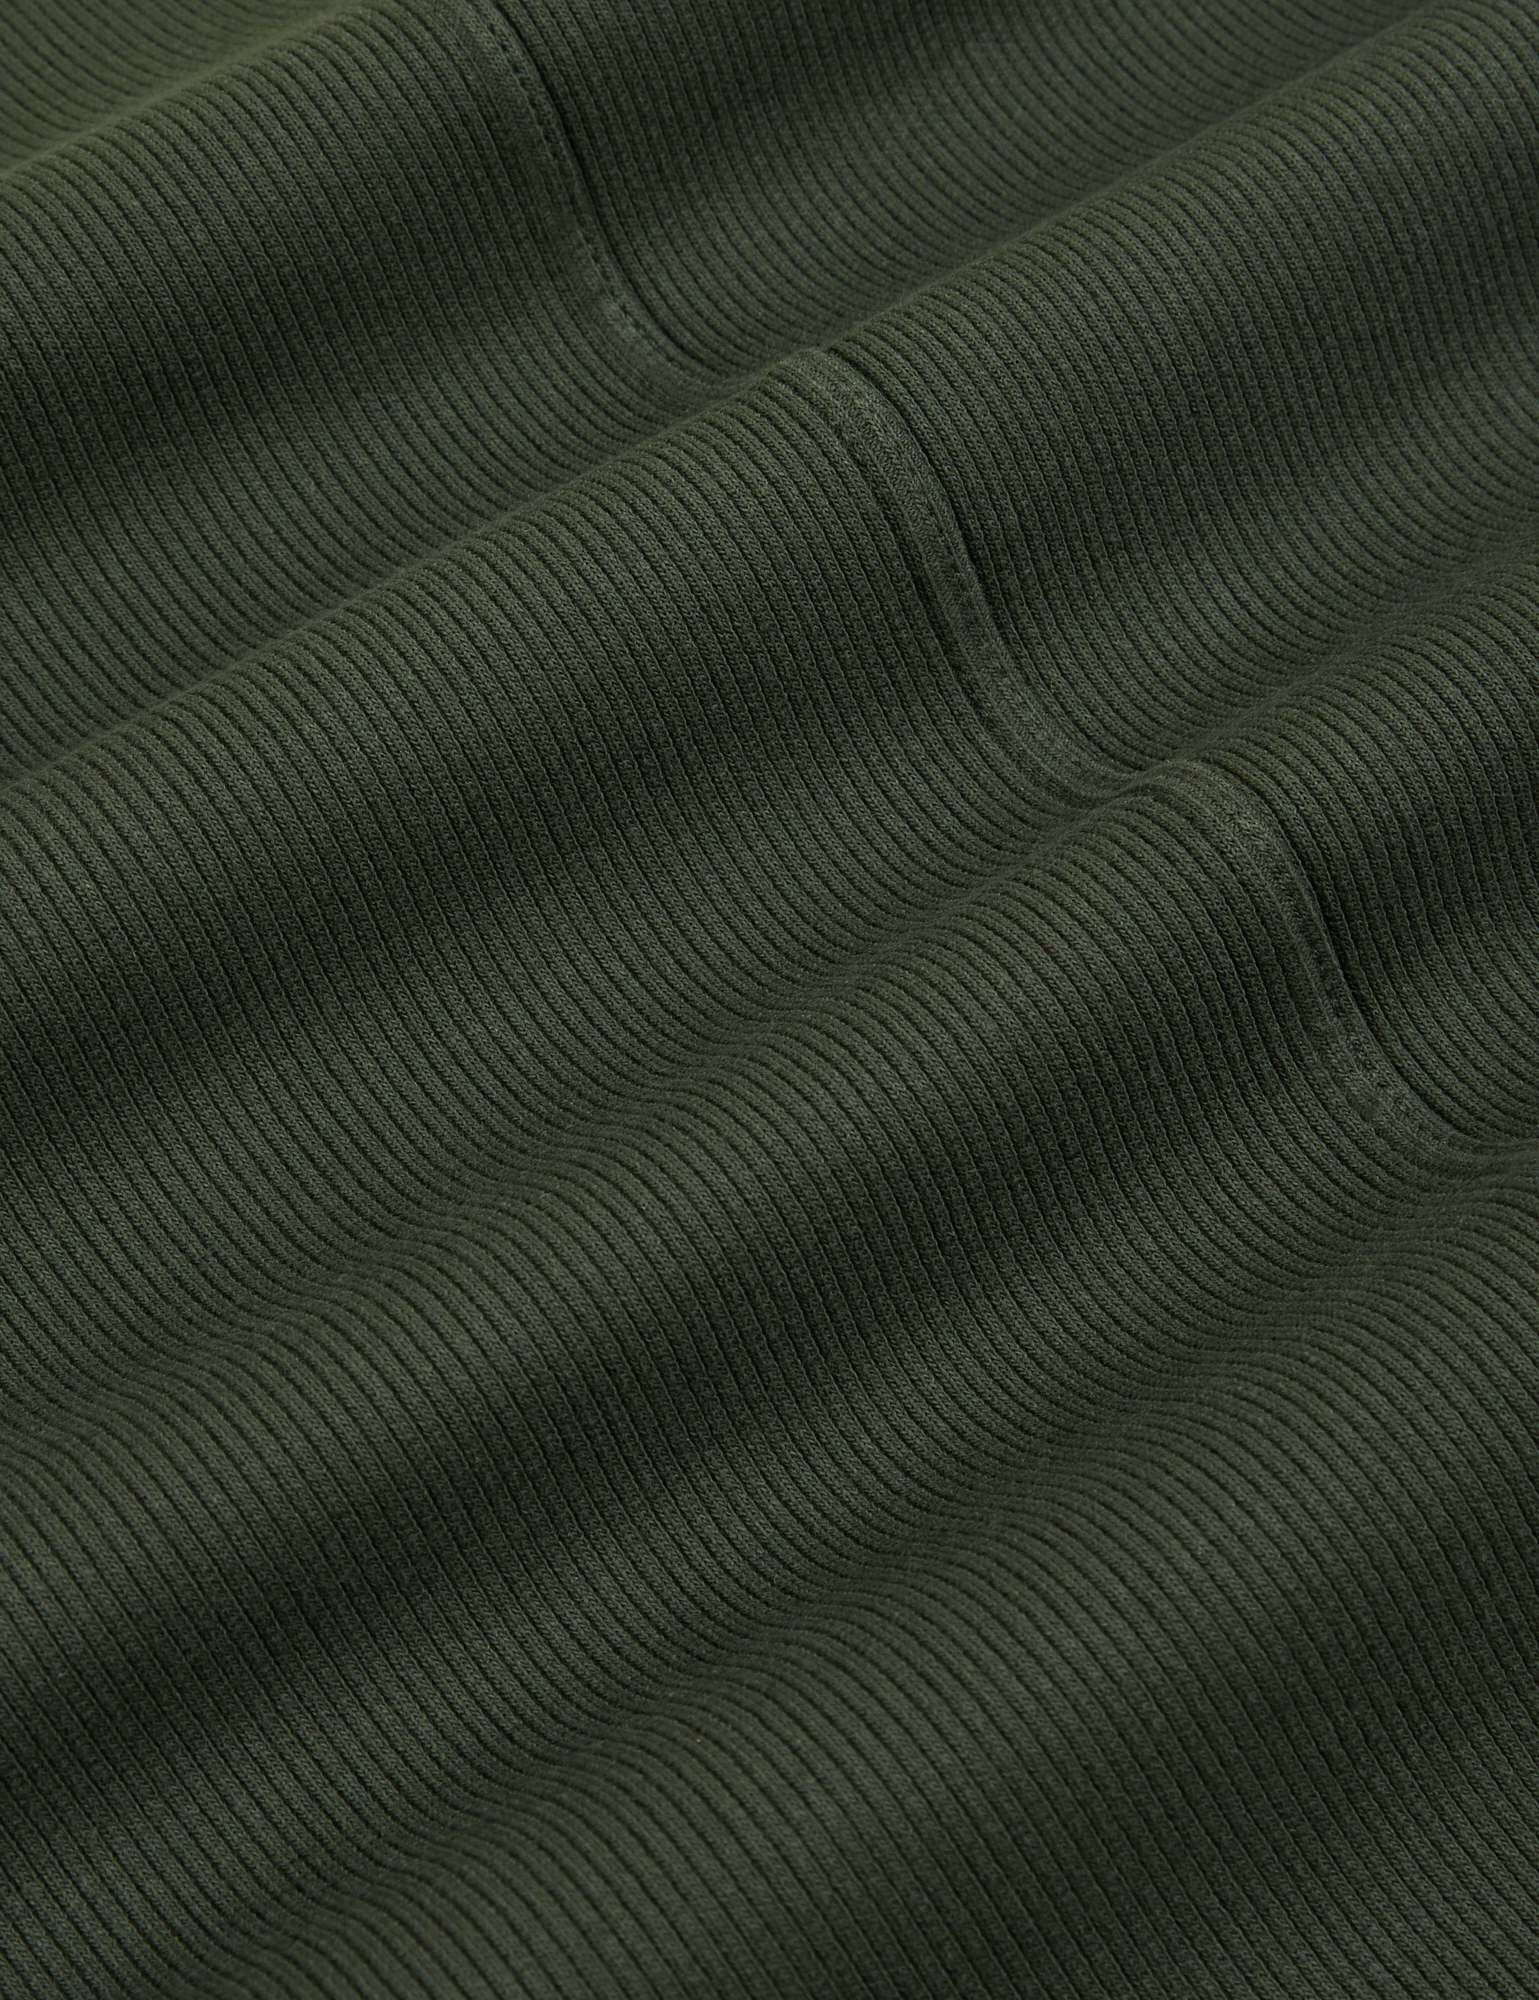 Wrap Top in Swamp Green fabric detail close up